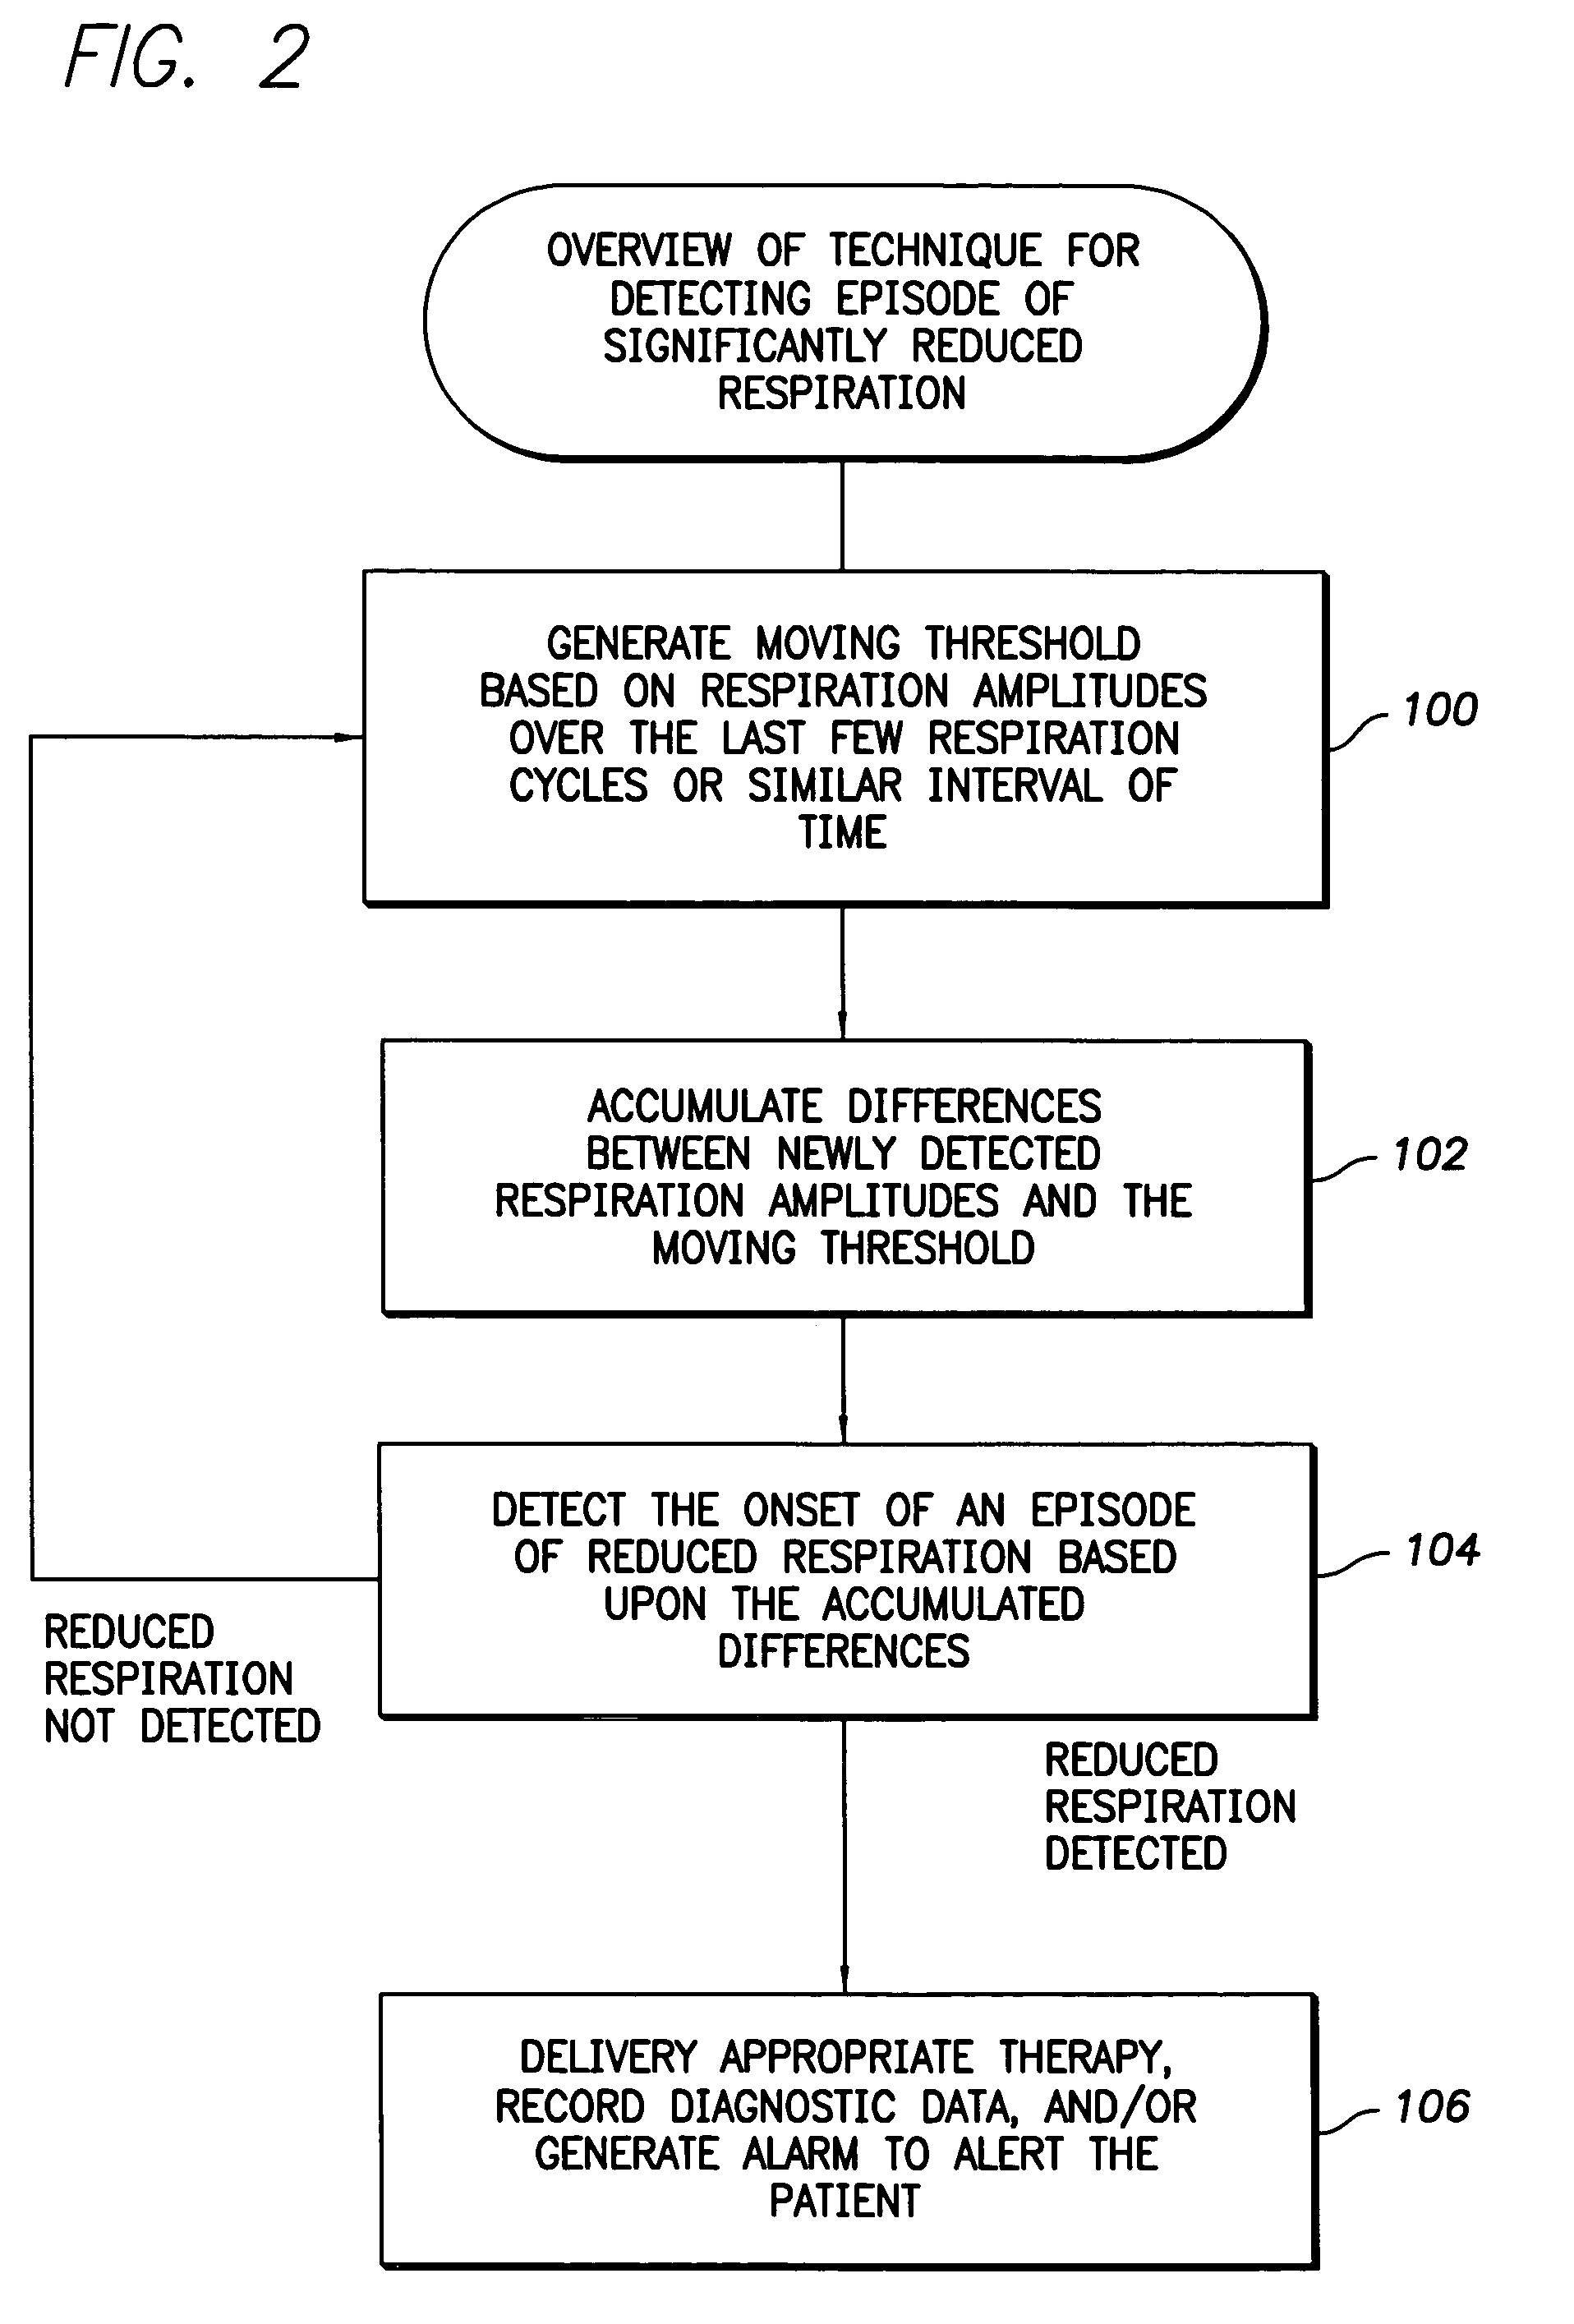 System and method for real-time apnea/hypopnea detection using an implantable medical system